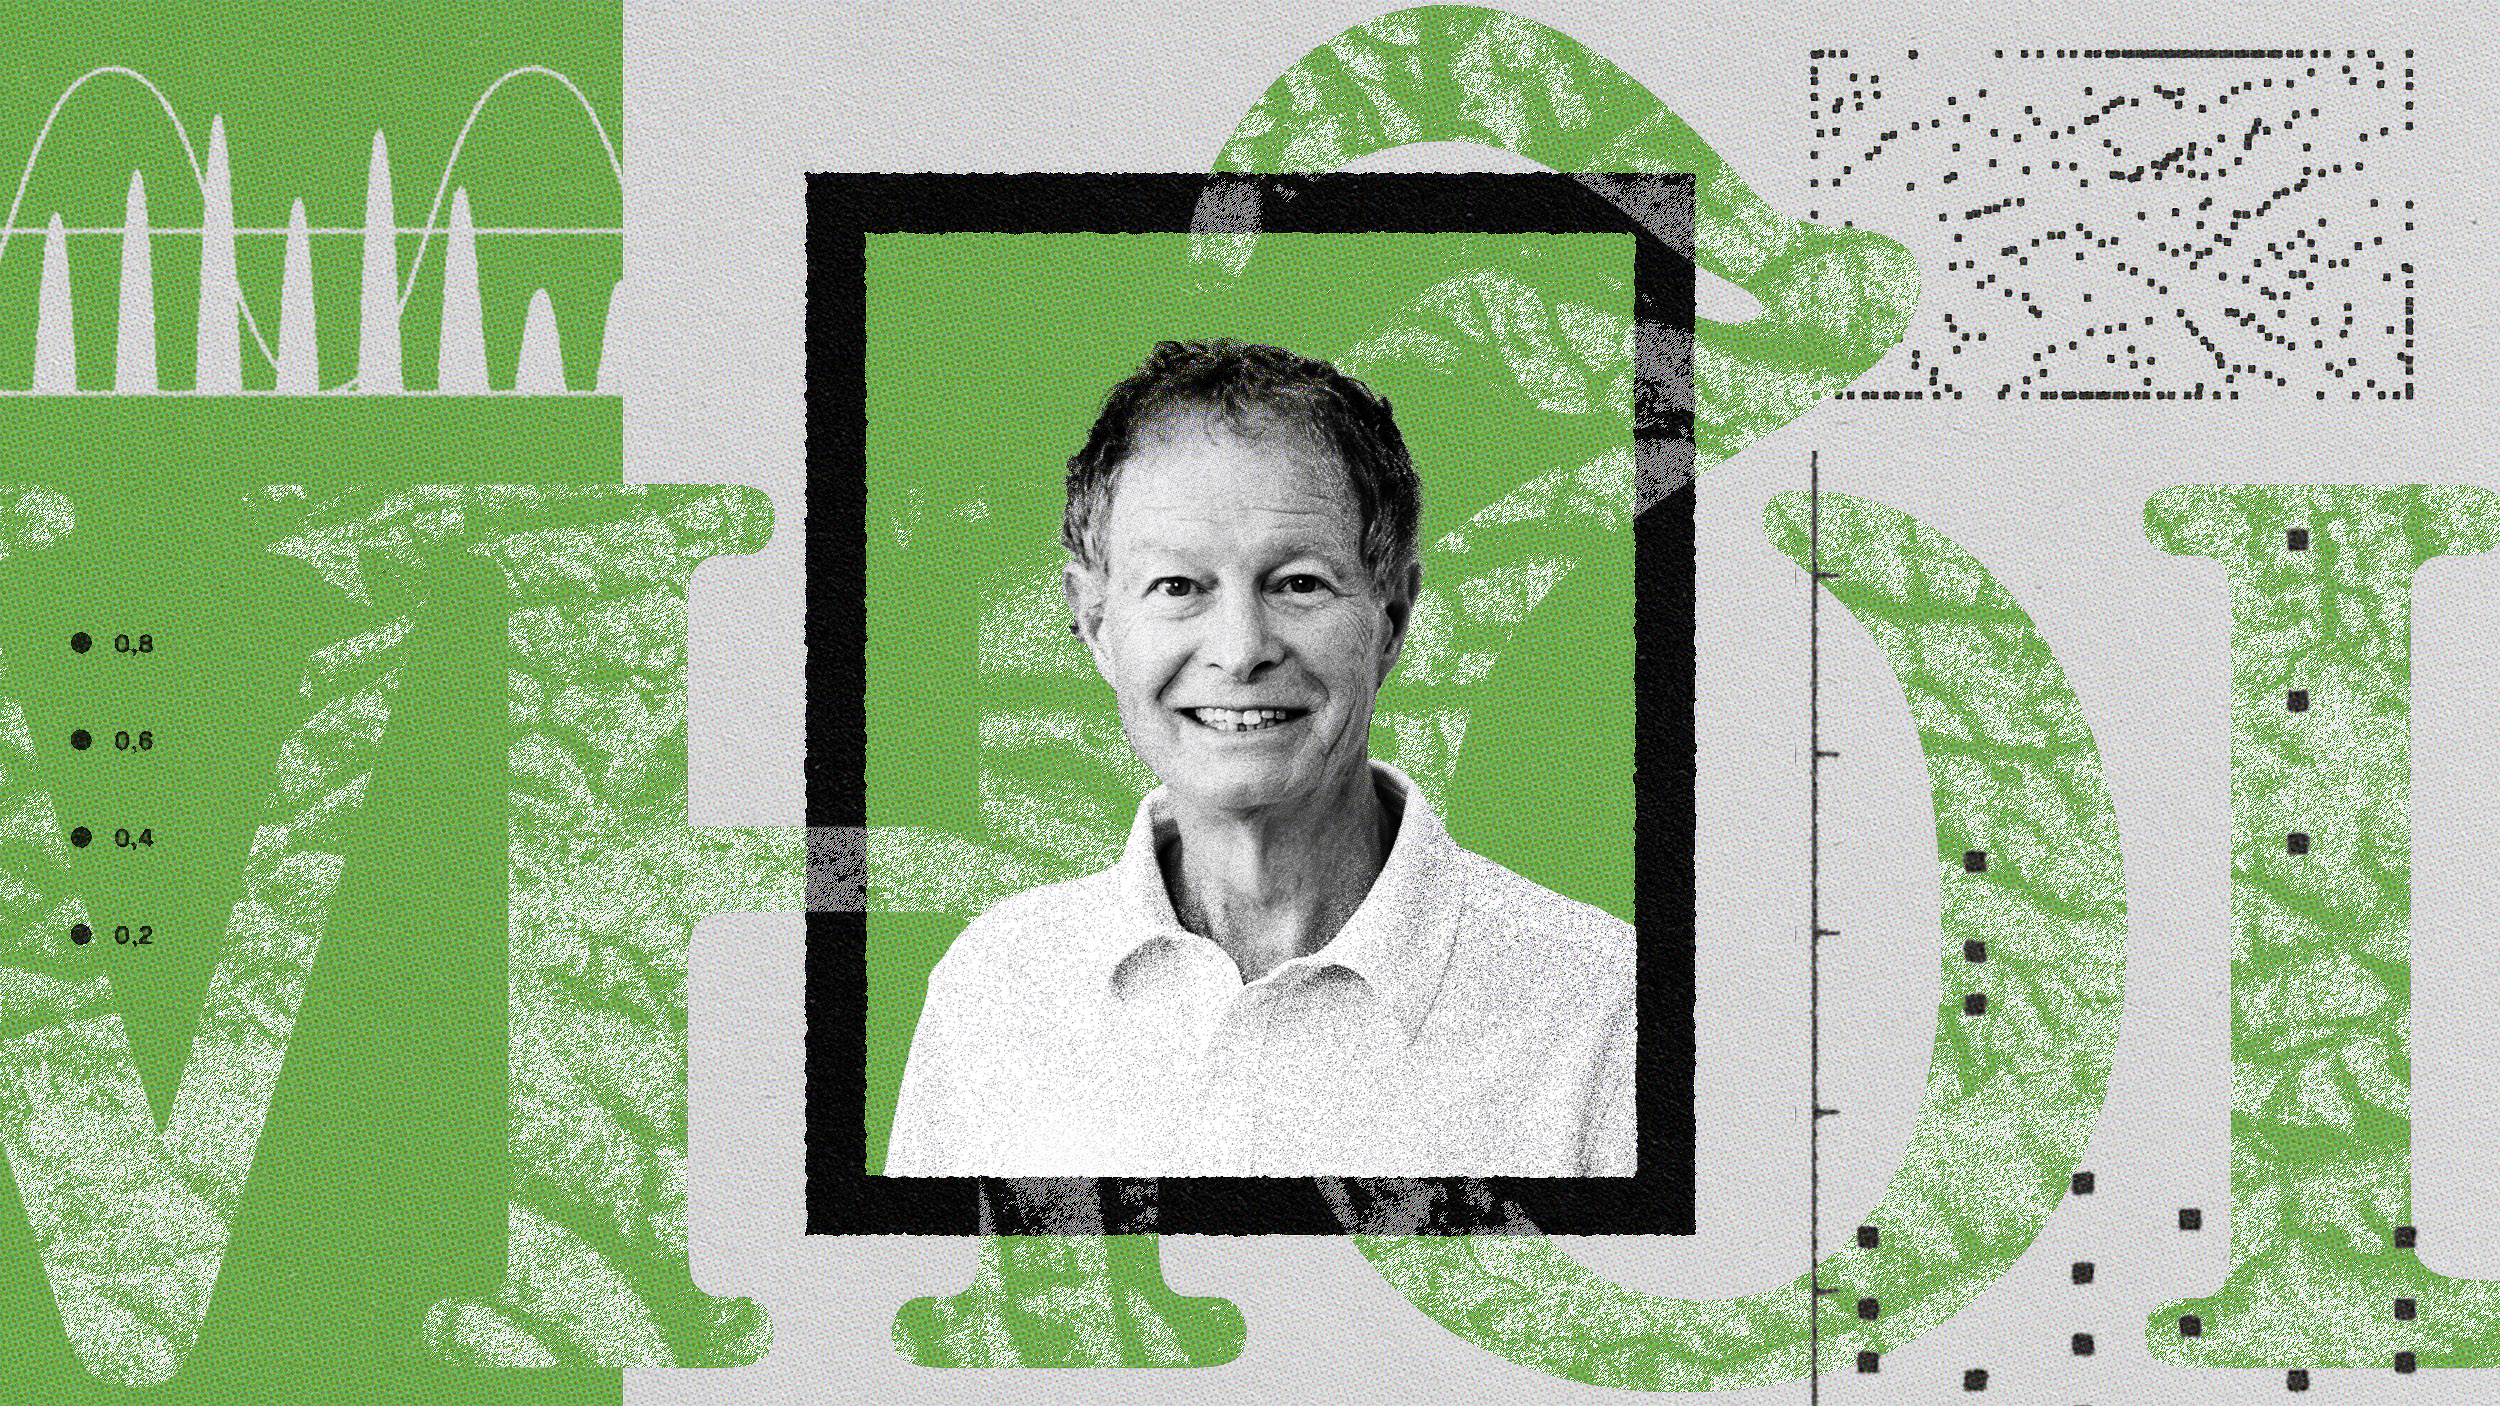 A grayscale photo of a middle-aged man in a white shirt, framed at the center of a green and gray abstract background with various patterns and graphs, embodies the essence of a leadership masterclass.